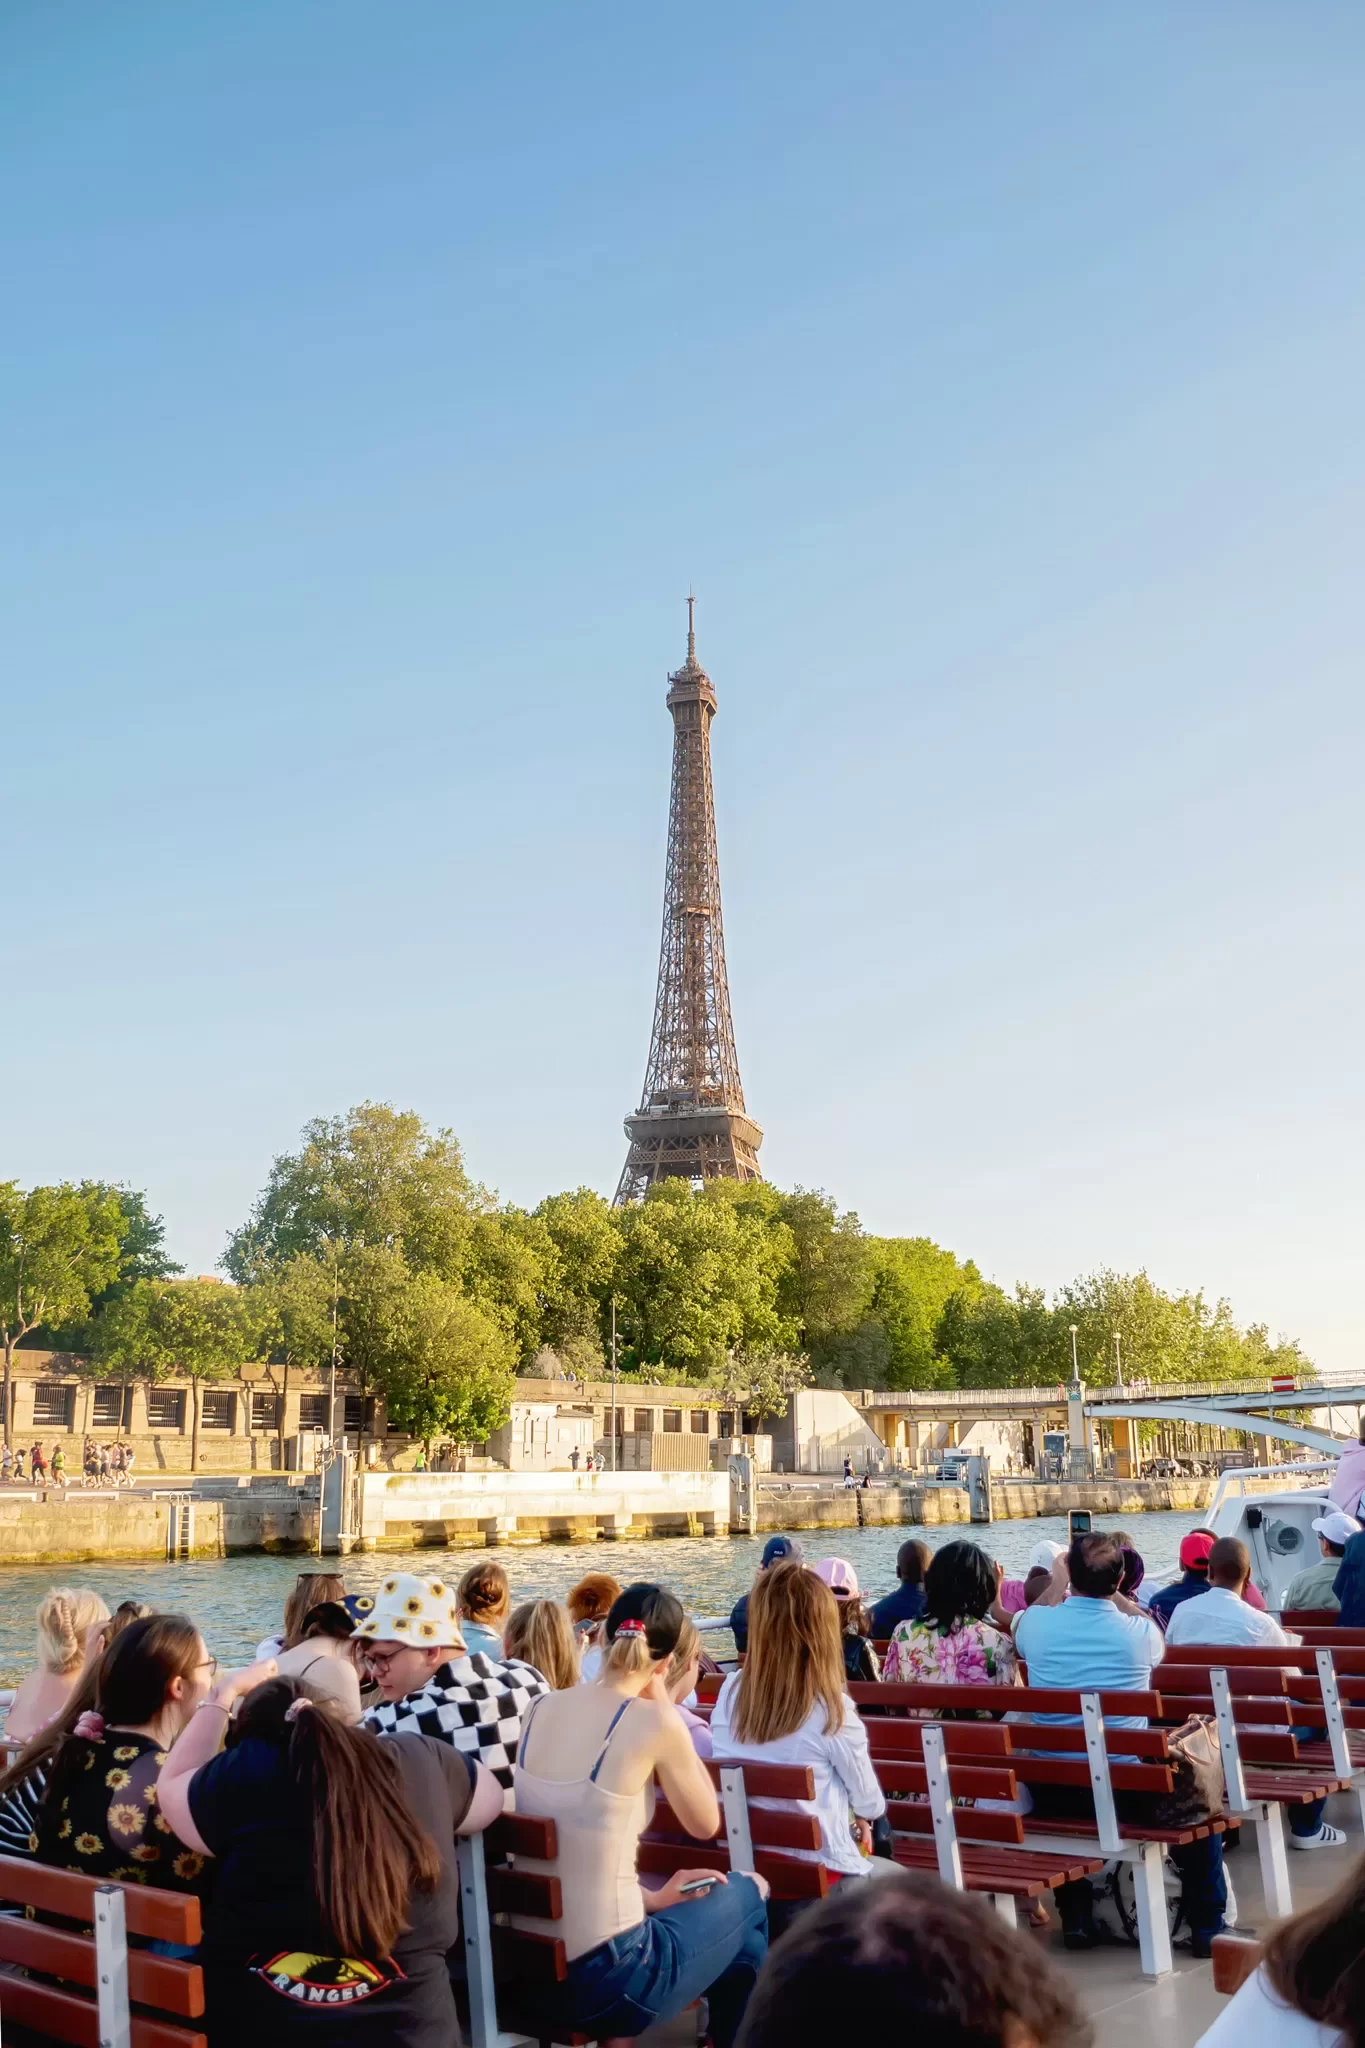 View of the Eiffel Tower from a Seine River Cruise on a 6 day trip to Paris